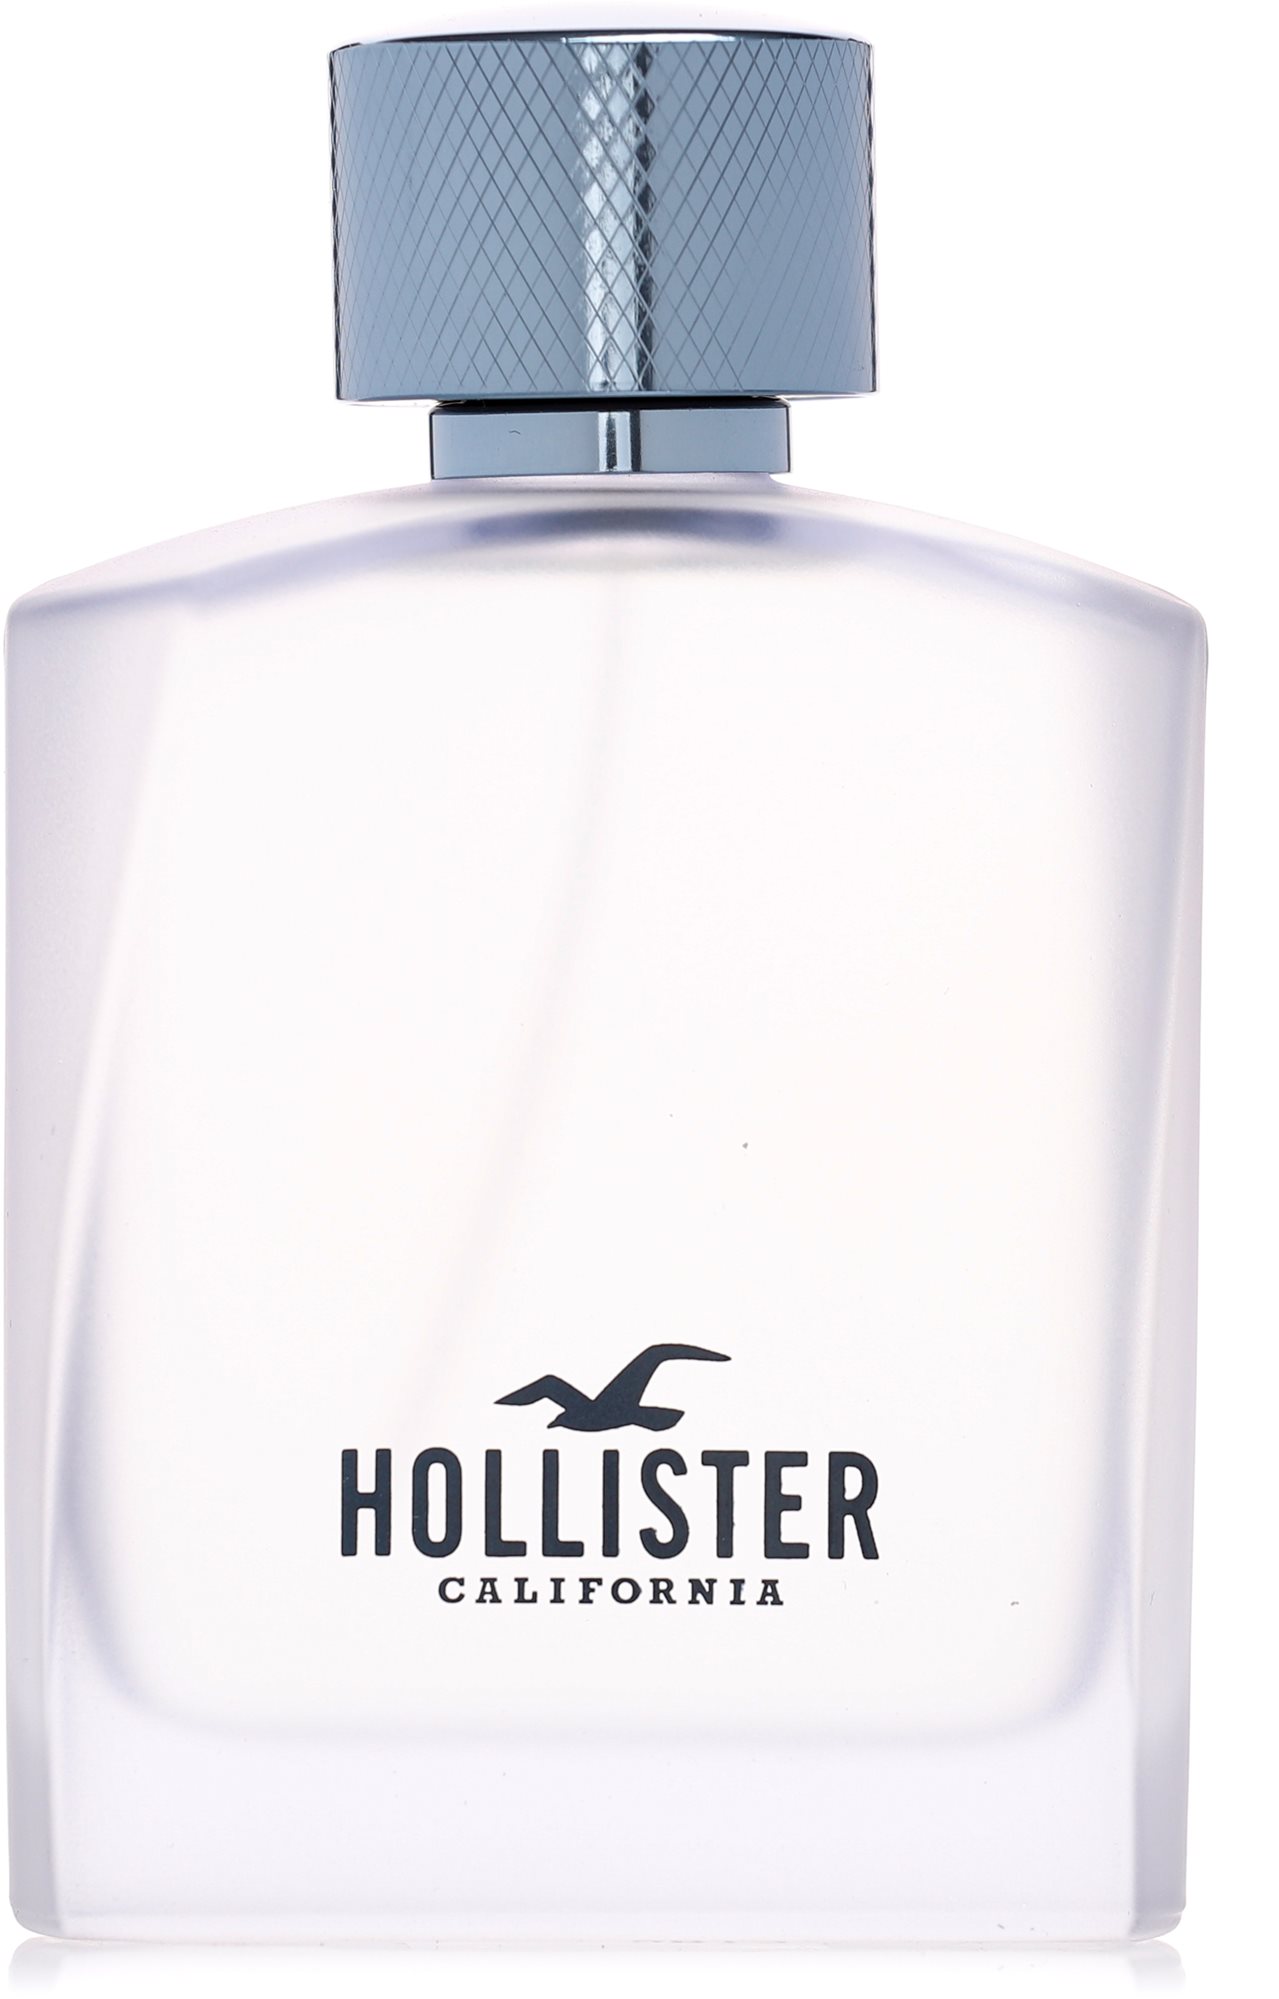 HOLLISTER Free Wave For Him EdT 100 ml